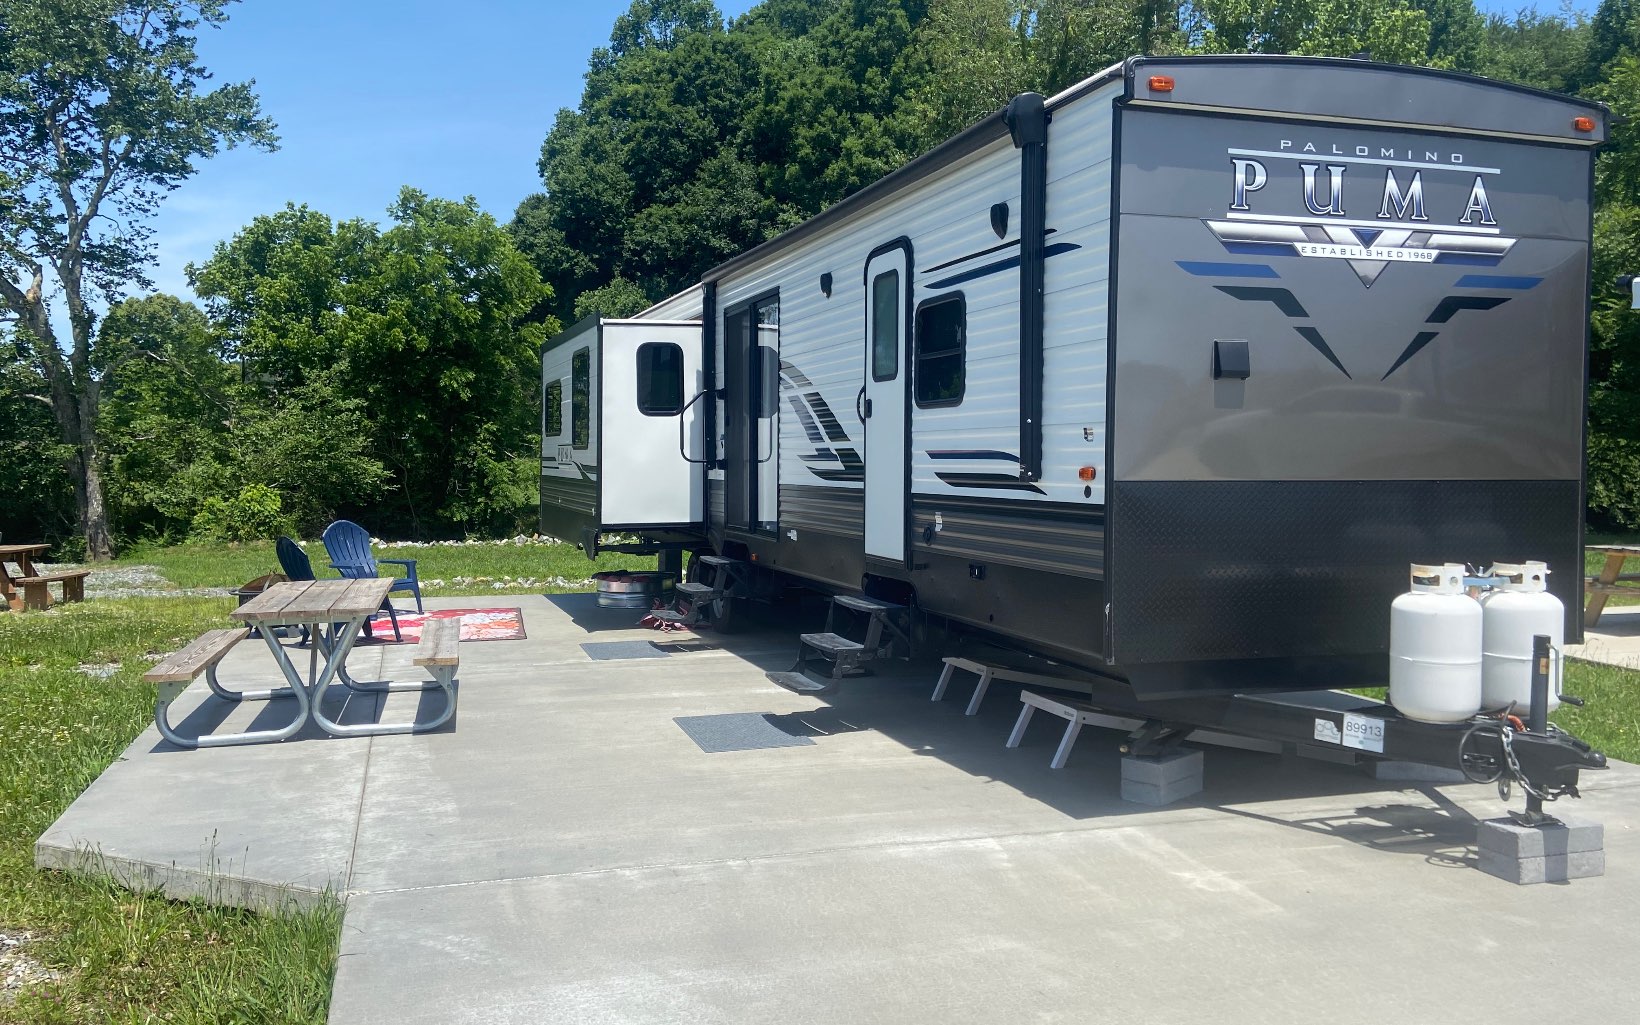 Nice RV Lot with creek frontage and a 2021 Palomino Puma Destination Trailer. Located in The Waterside Tiny Home & RV Community which offers many amenities such as a pool, hot tub, playground, lakefront clubhouse, community kitchen, a wood fired pizza oven, fire pits w/ sitting areas overlooking the stocked community lake, disc golf and a basketball goal. This area is conveniently accessed by paved roads & is close to both Lake Blue Ridge, Lake Nottely, The trout-filled Toccoa River and many other attractions that let you enjoy all that the mountains have to offer. This spacious trailer is 42' long has 4 slide outs a queen size bed, a bunkhouse and much more. (See Spec Sheet in the Documents). This property would make a great short term rental or a family base camp for exploring the North Georgia Mountains. Full time residency permitted.